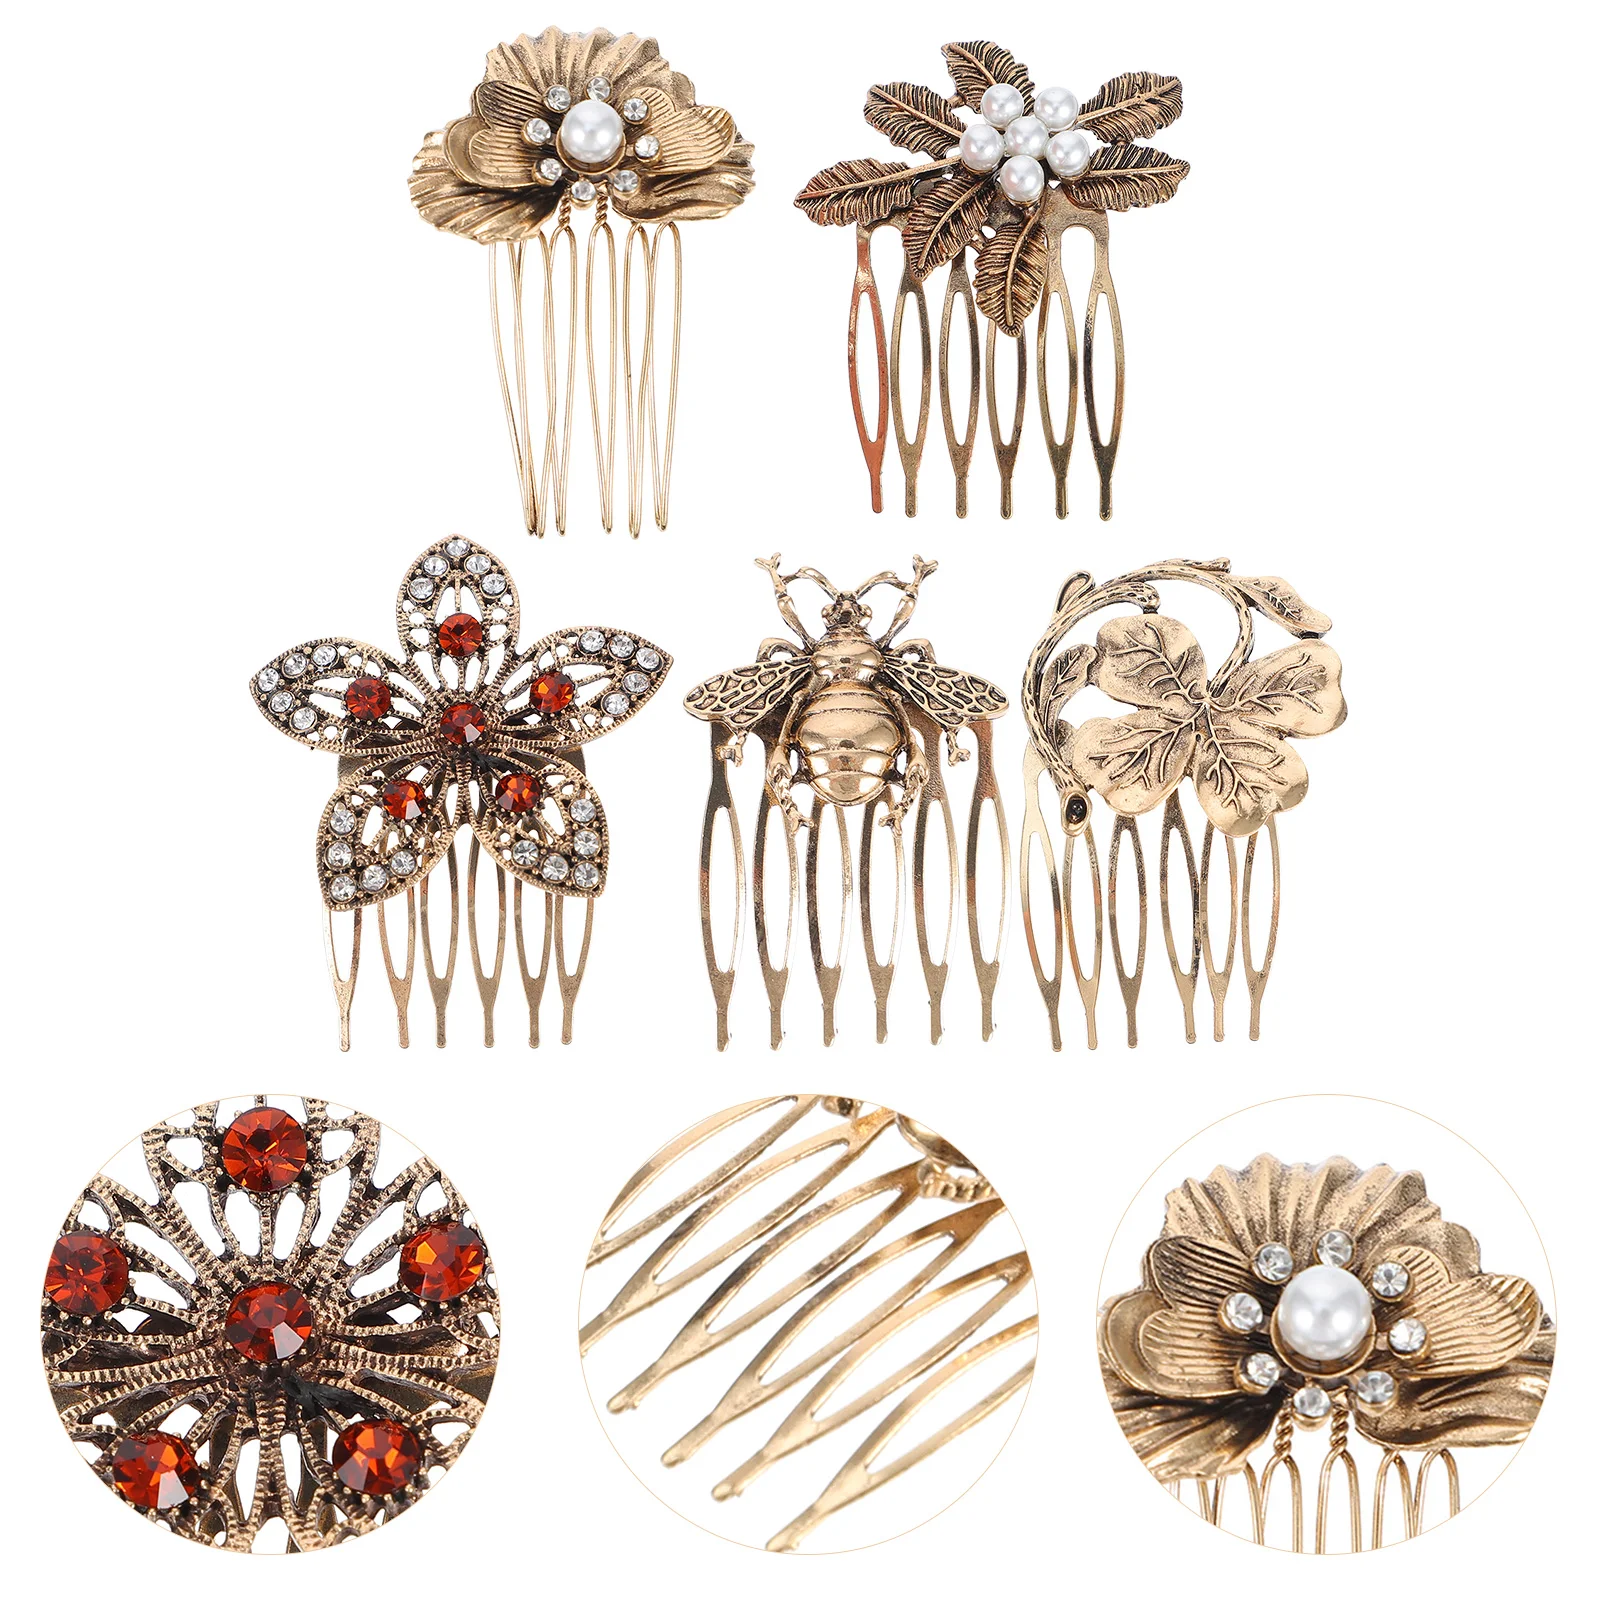 

5 Pcs Retro Diamonds Hair Combs Wedding Accessories Vintage Hairpin Chic Pearl Alloy